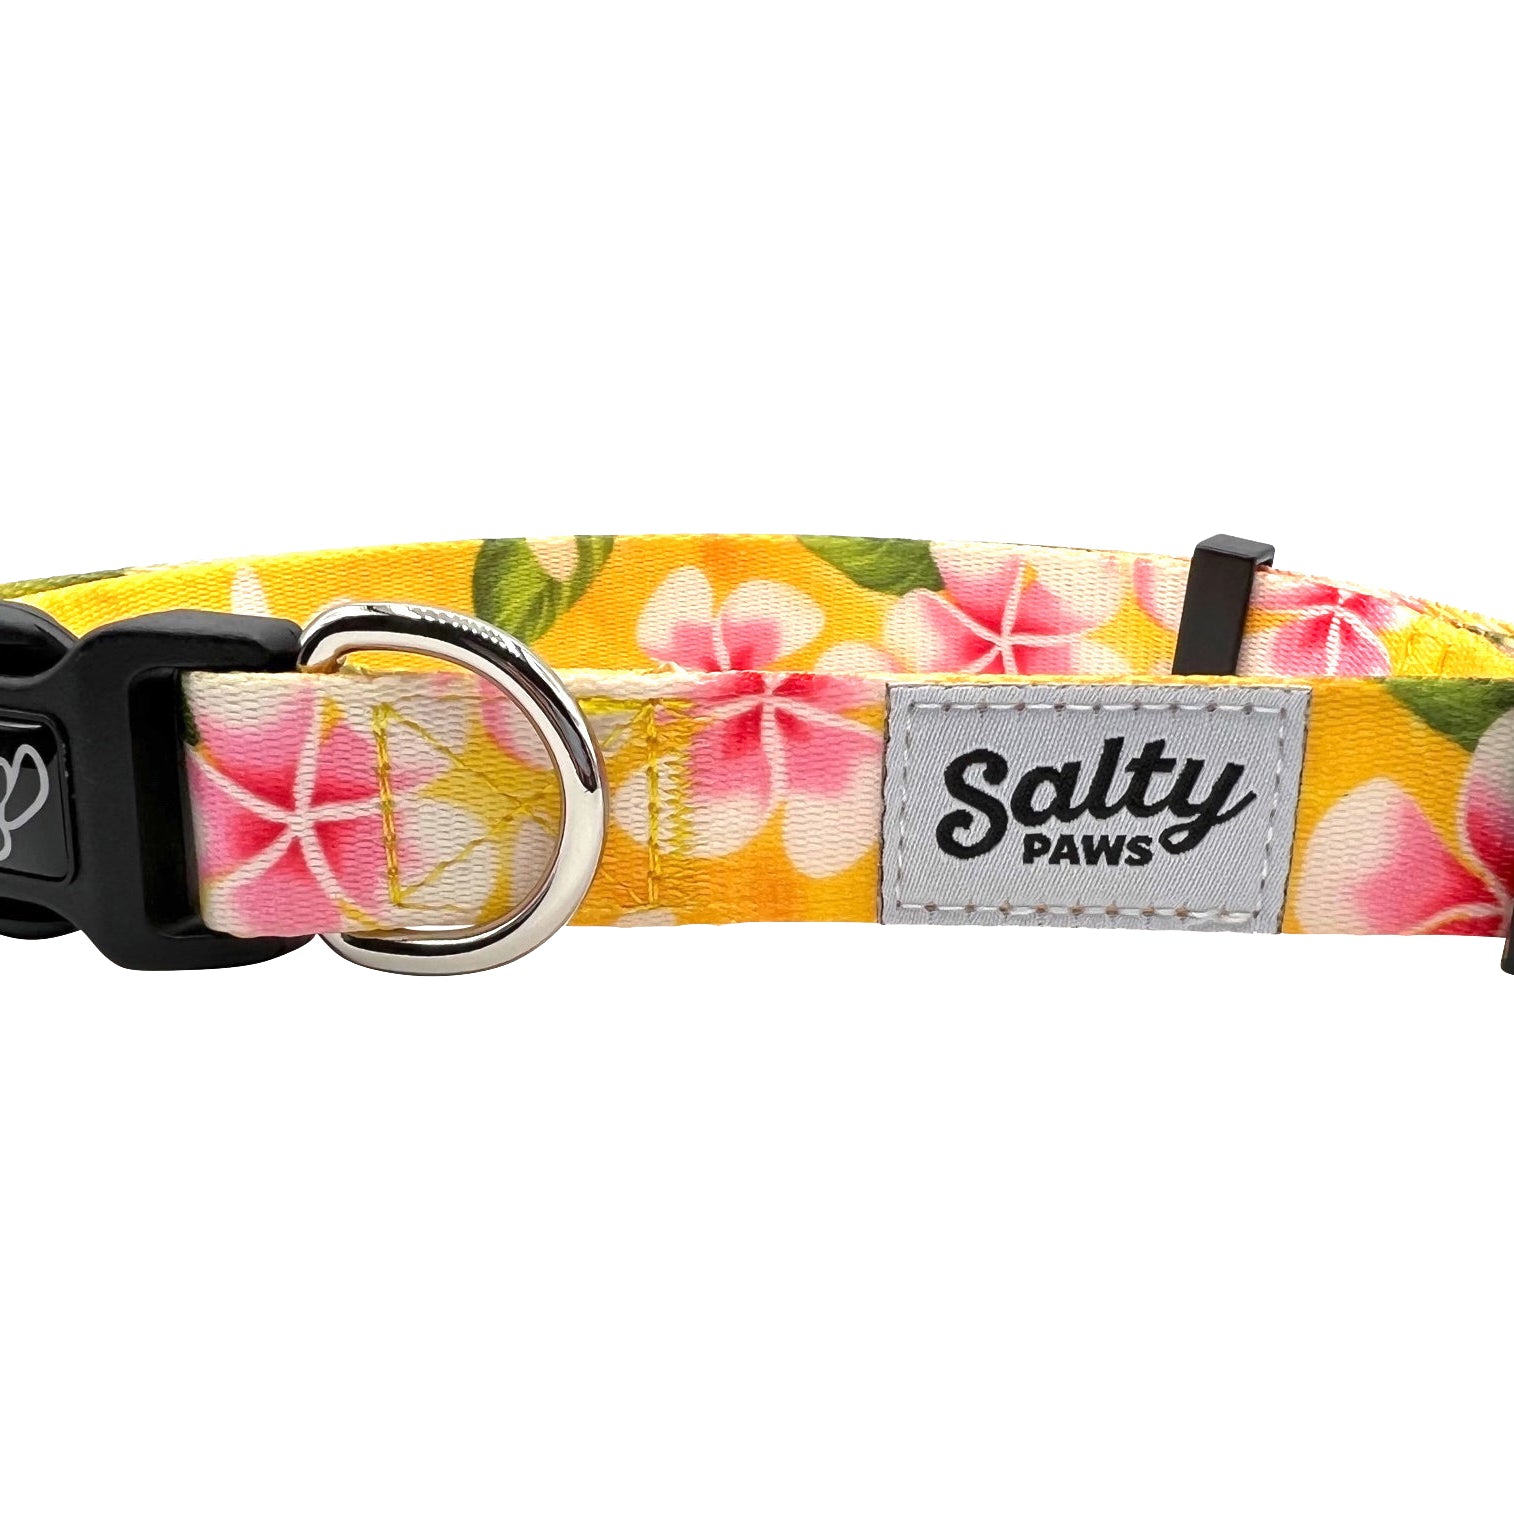 Salty Paws Surfing Dog Collar | Designs for Beach Dogs,  Floral, Fishing, Surfing, Hawaiian,  Yellow Floral M